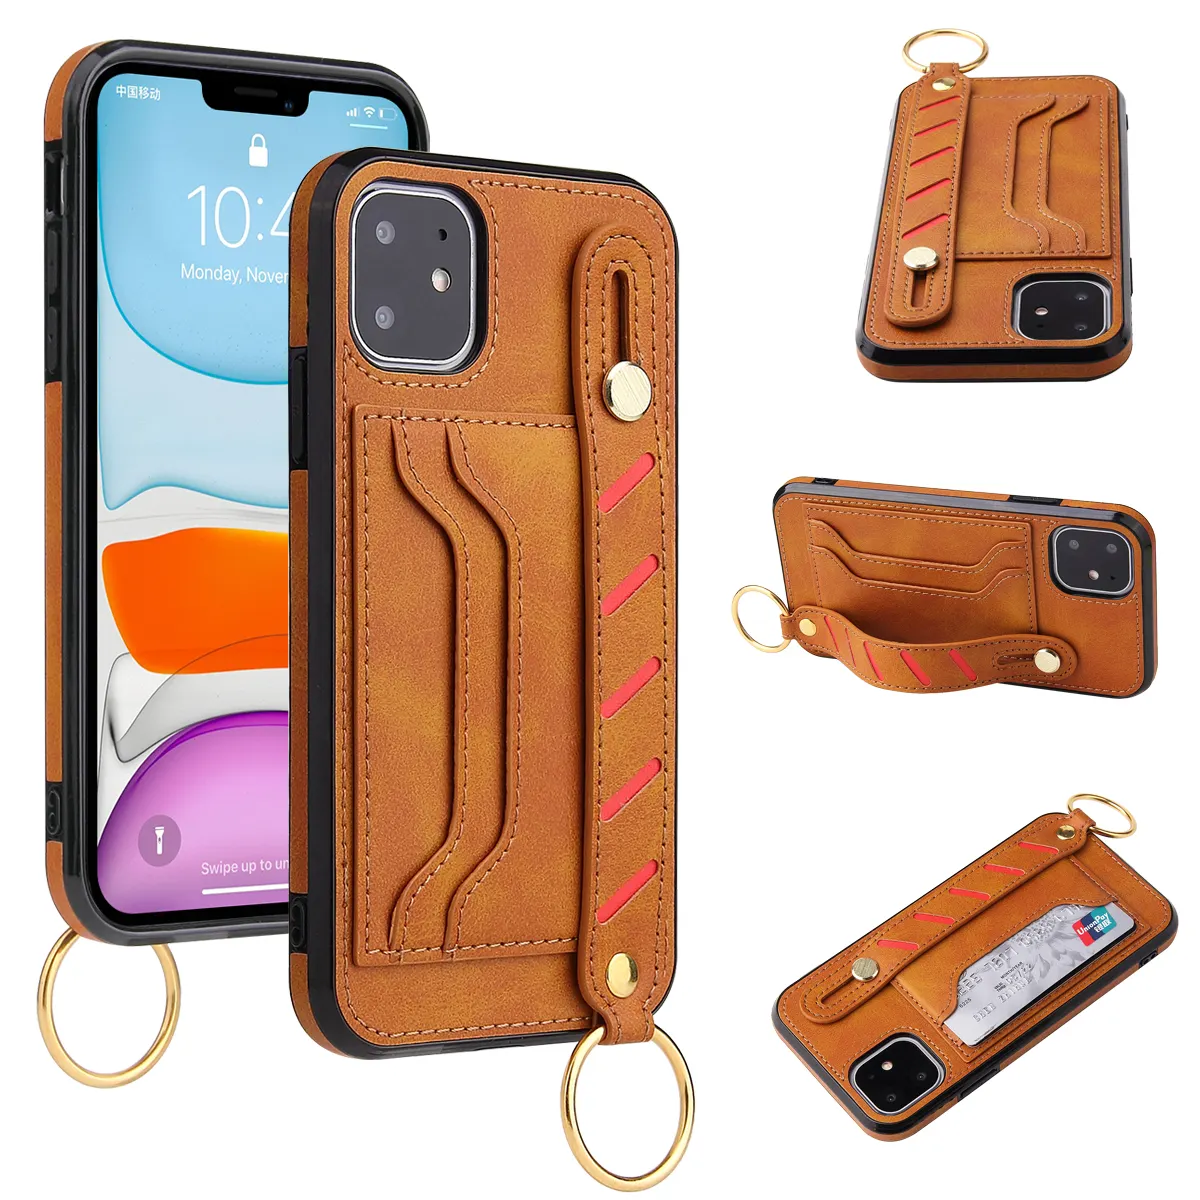 IVANHOE Cover Case For iphone 12 11 Pro Max Leather Bag Phone Cases For Apple iphone 6 6S 7 8 Plus Cover Coque